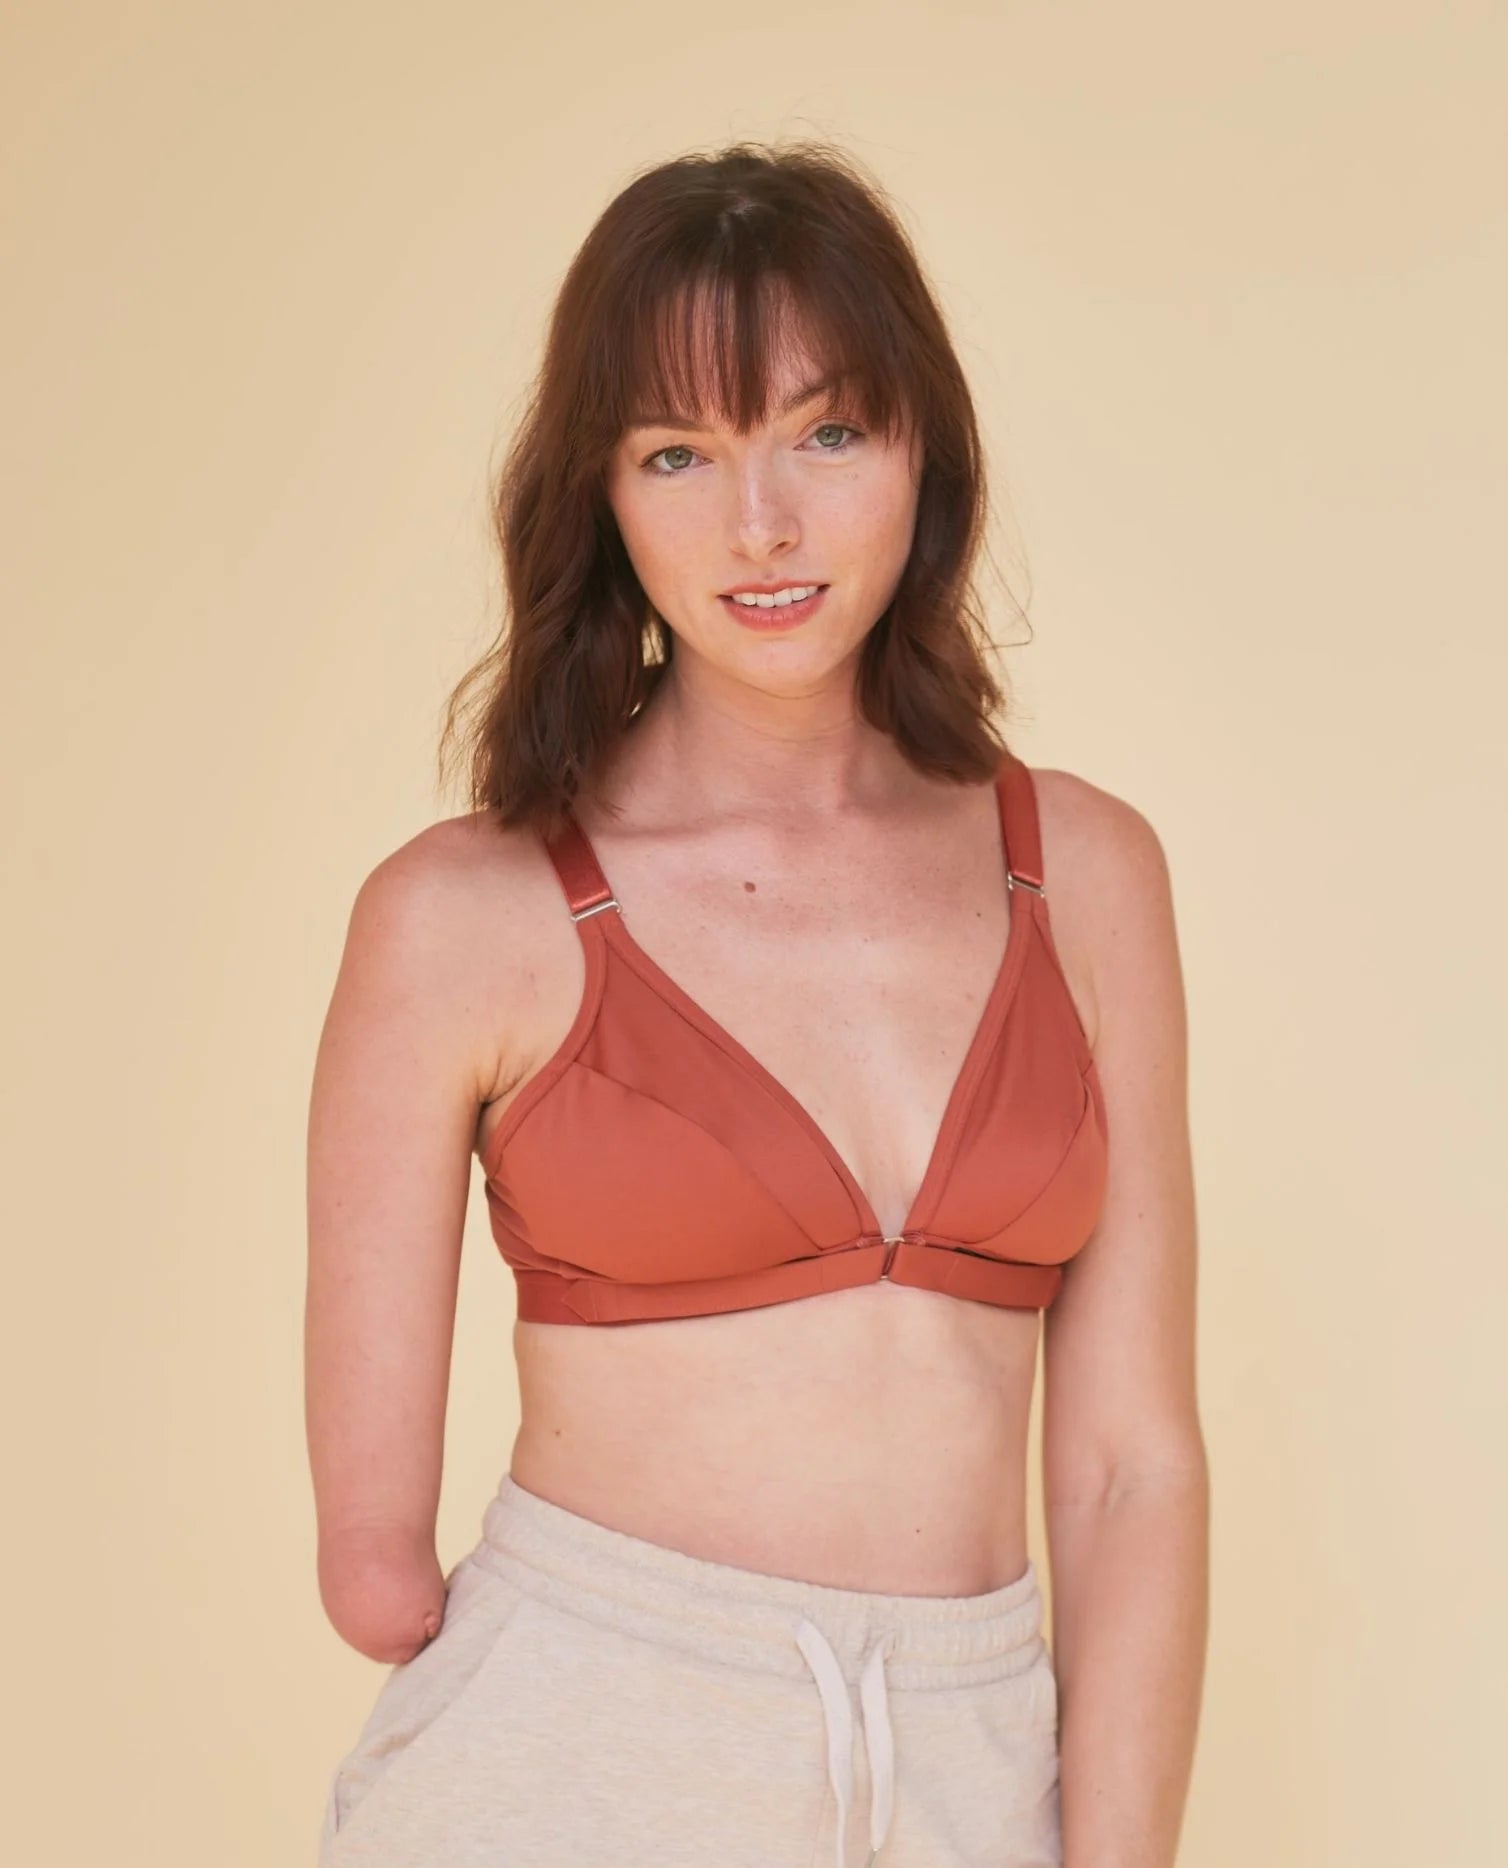 Able2Wear - With easy-fastening poppers along the front panel, our Front- Fastening Bras are a great solution for those with limited hand dexterity  or arthritis. Made from breathable cotton and with padded shoulder